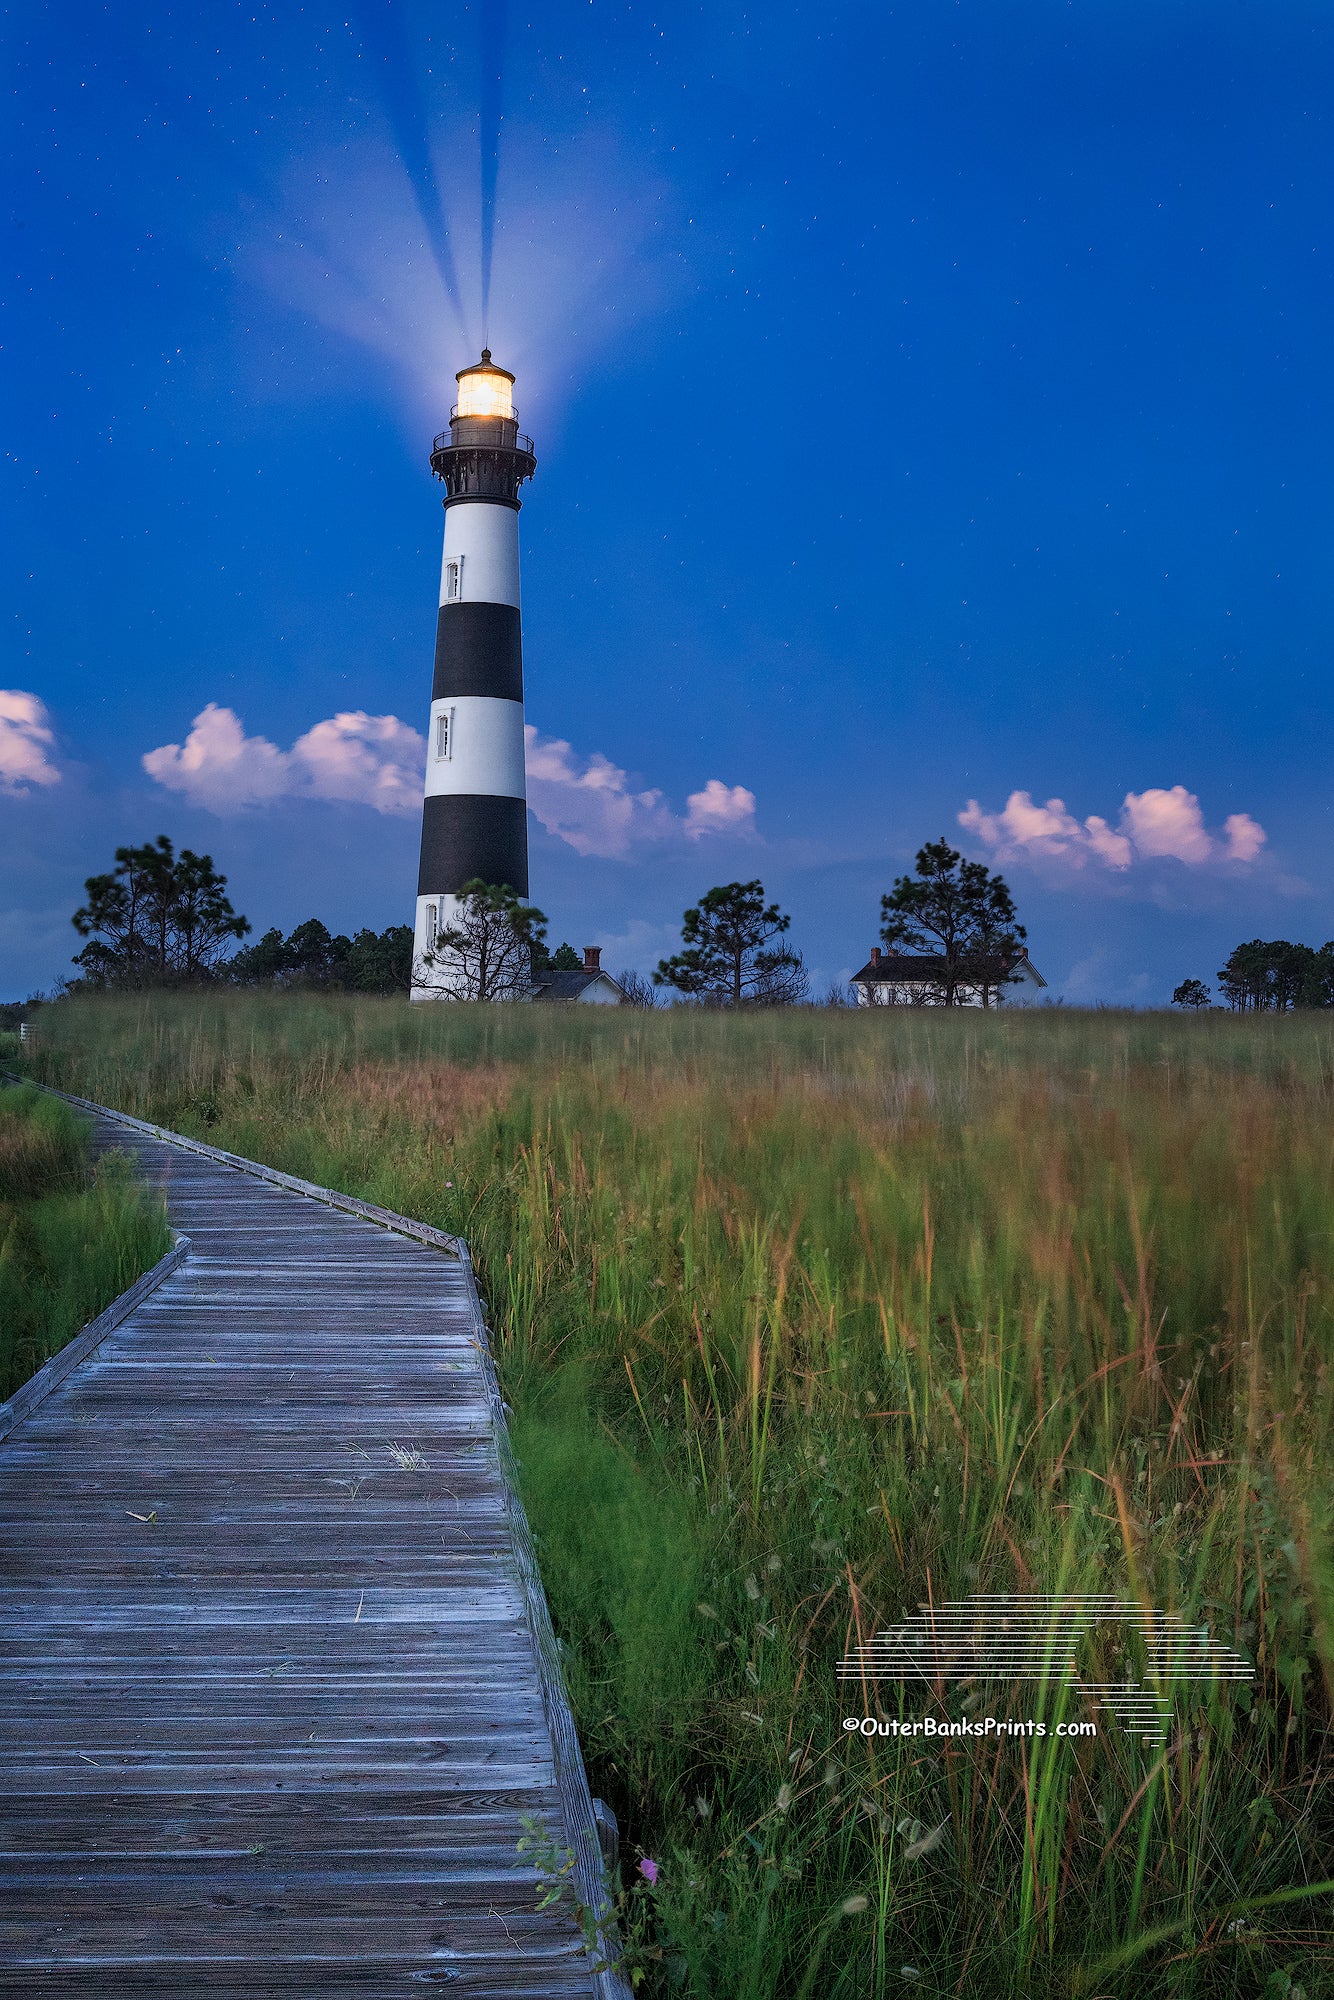 Captured from the boardwalk in the marsh behind Bodie Island Lighthouse just after twilight.